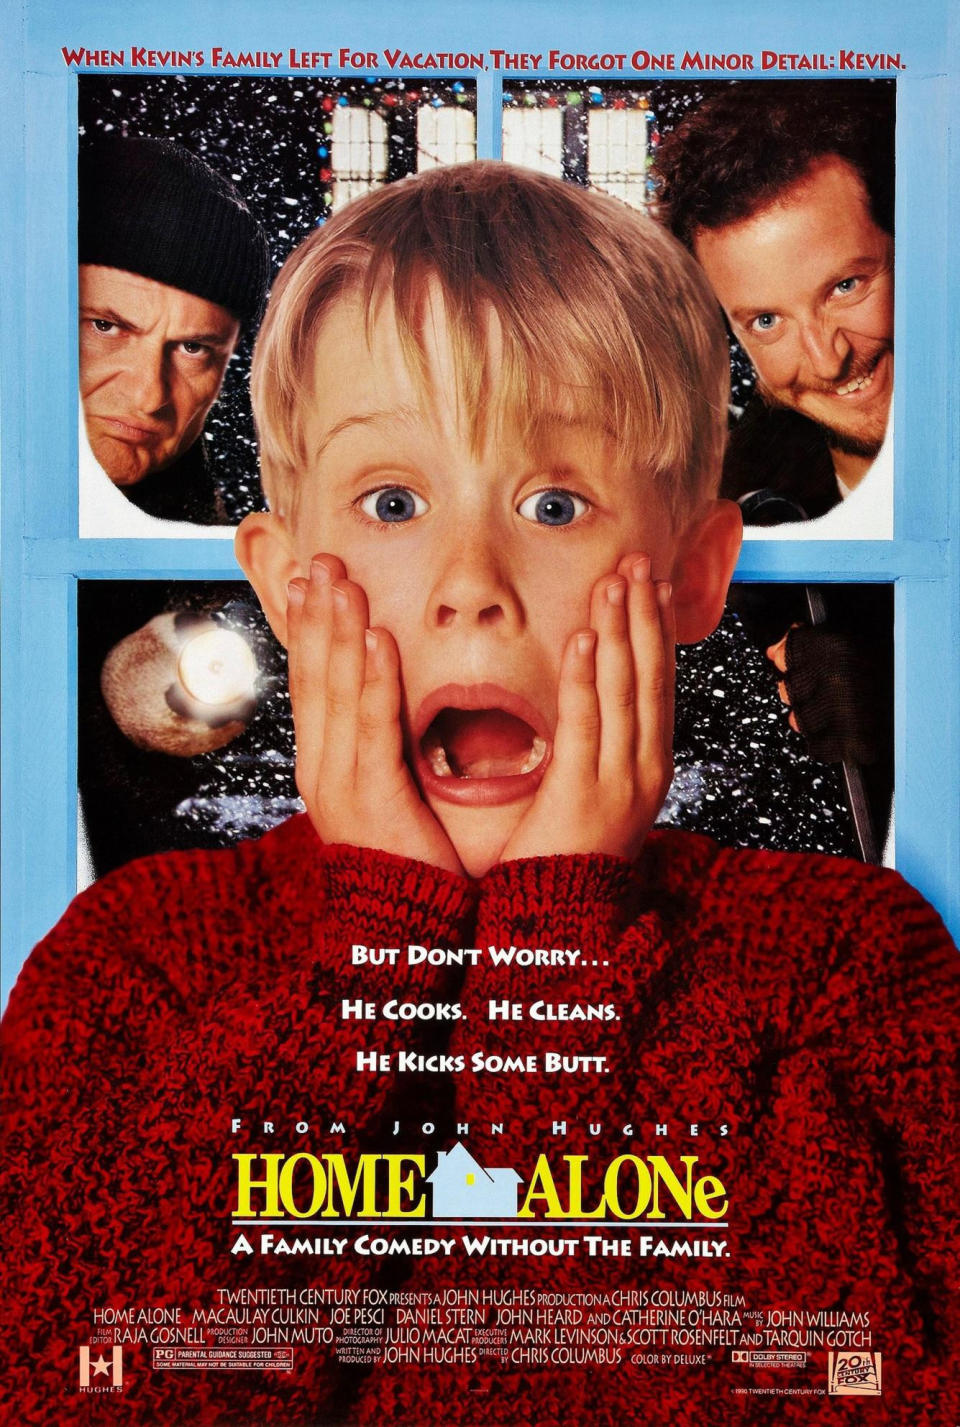 Poster for the 1990 movie 'Home Alone'. (Credit: 20th Century Fox)